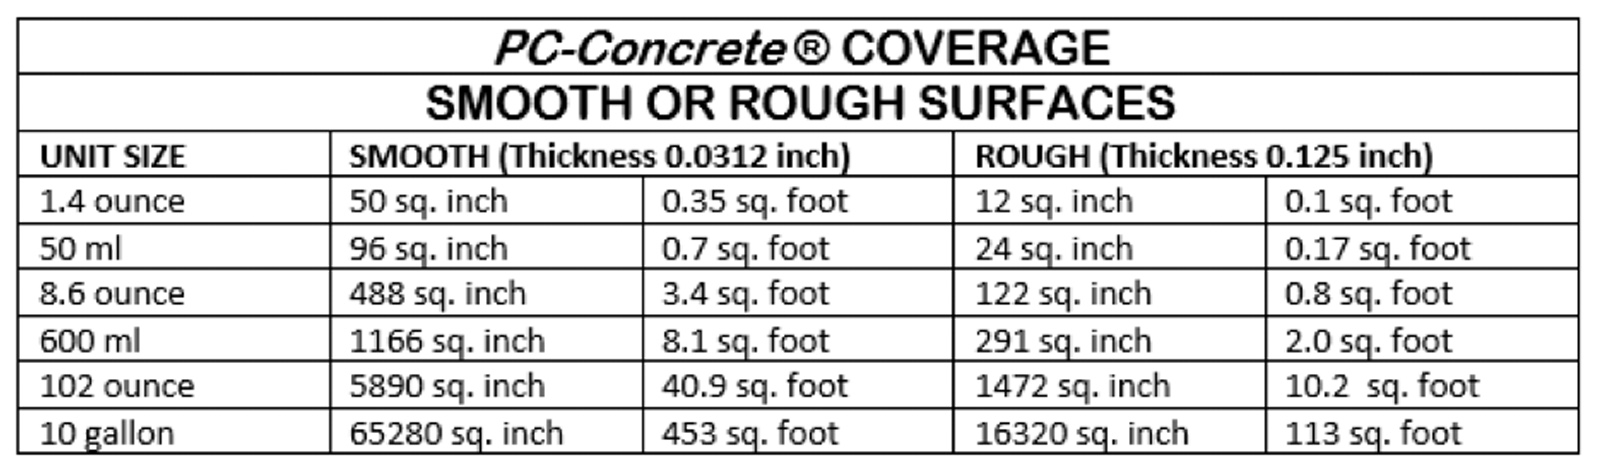 PC-Concrete Coverage - Smooth Or Rough Surfaces